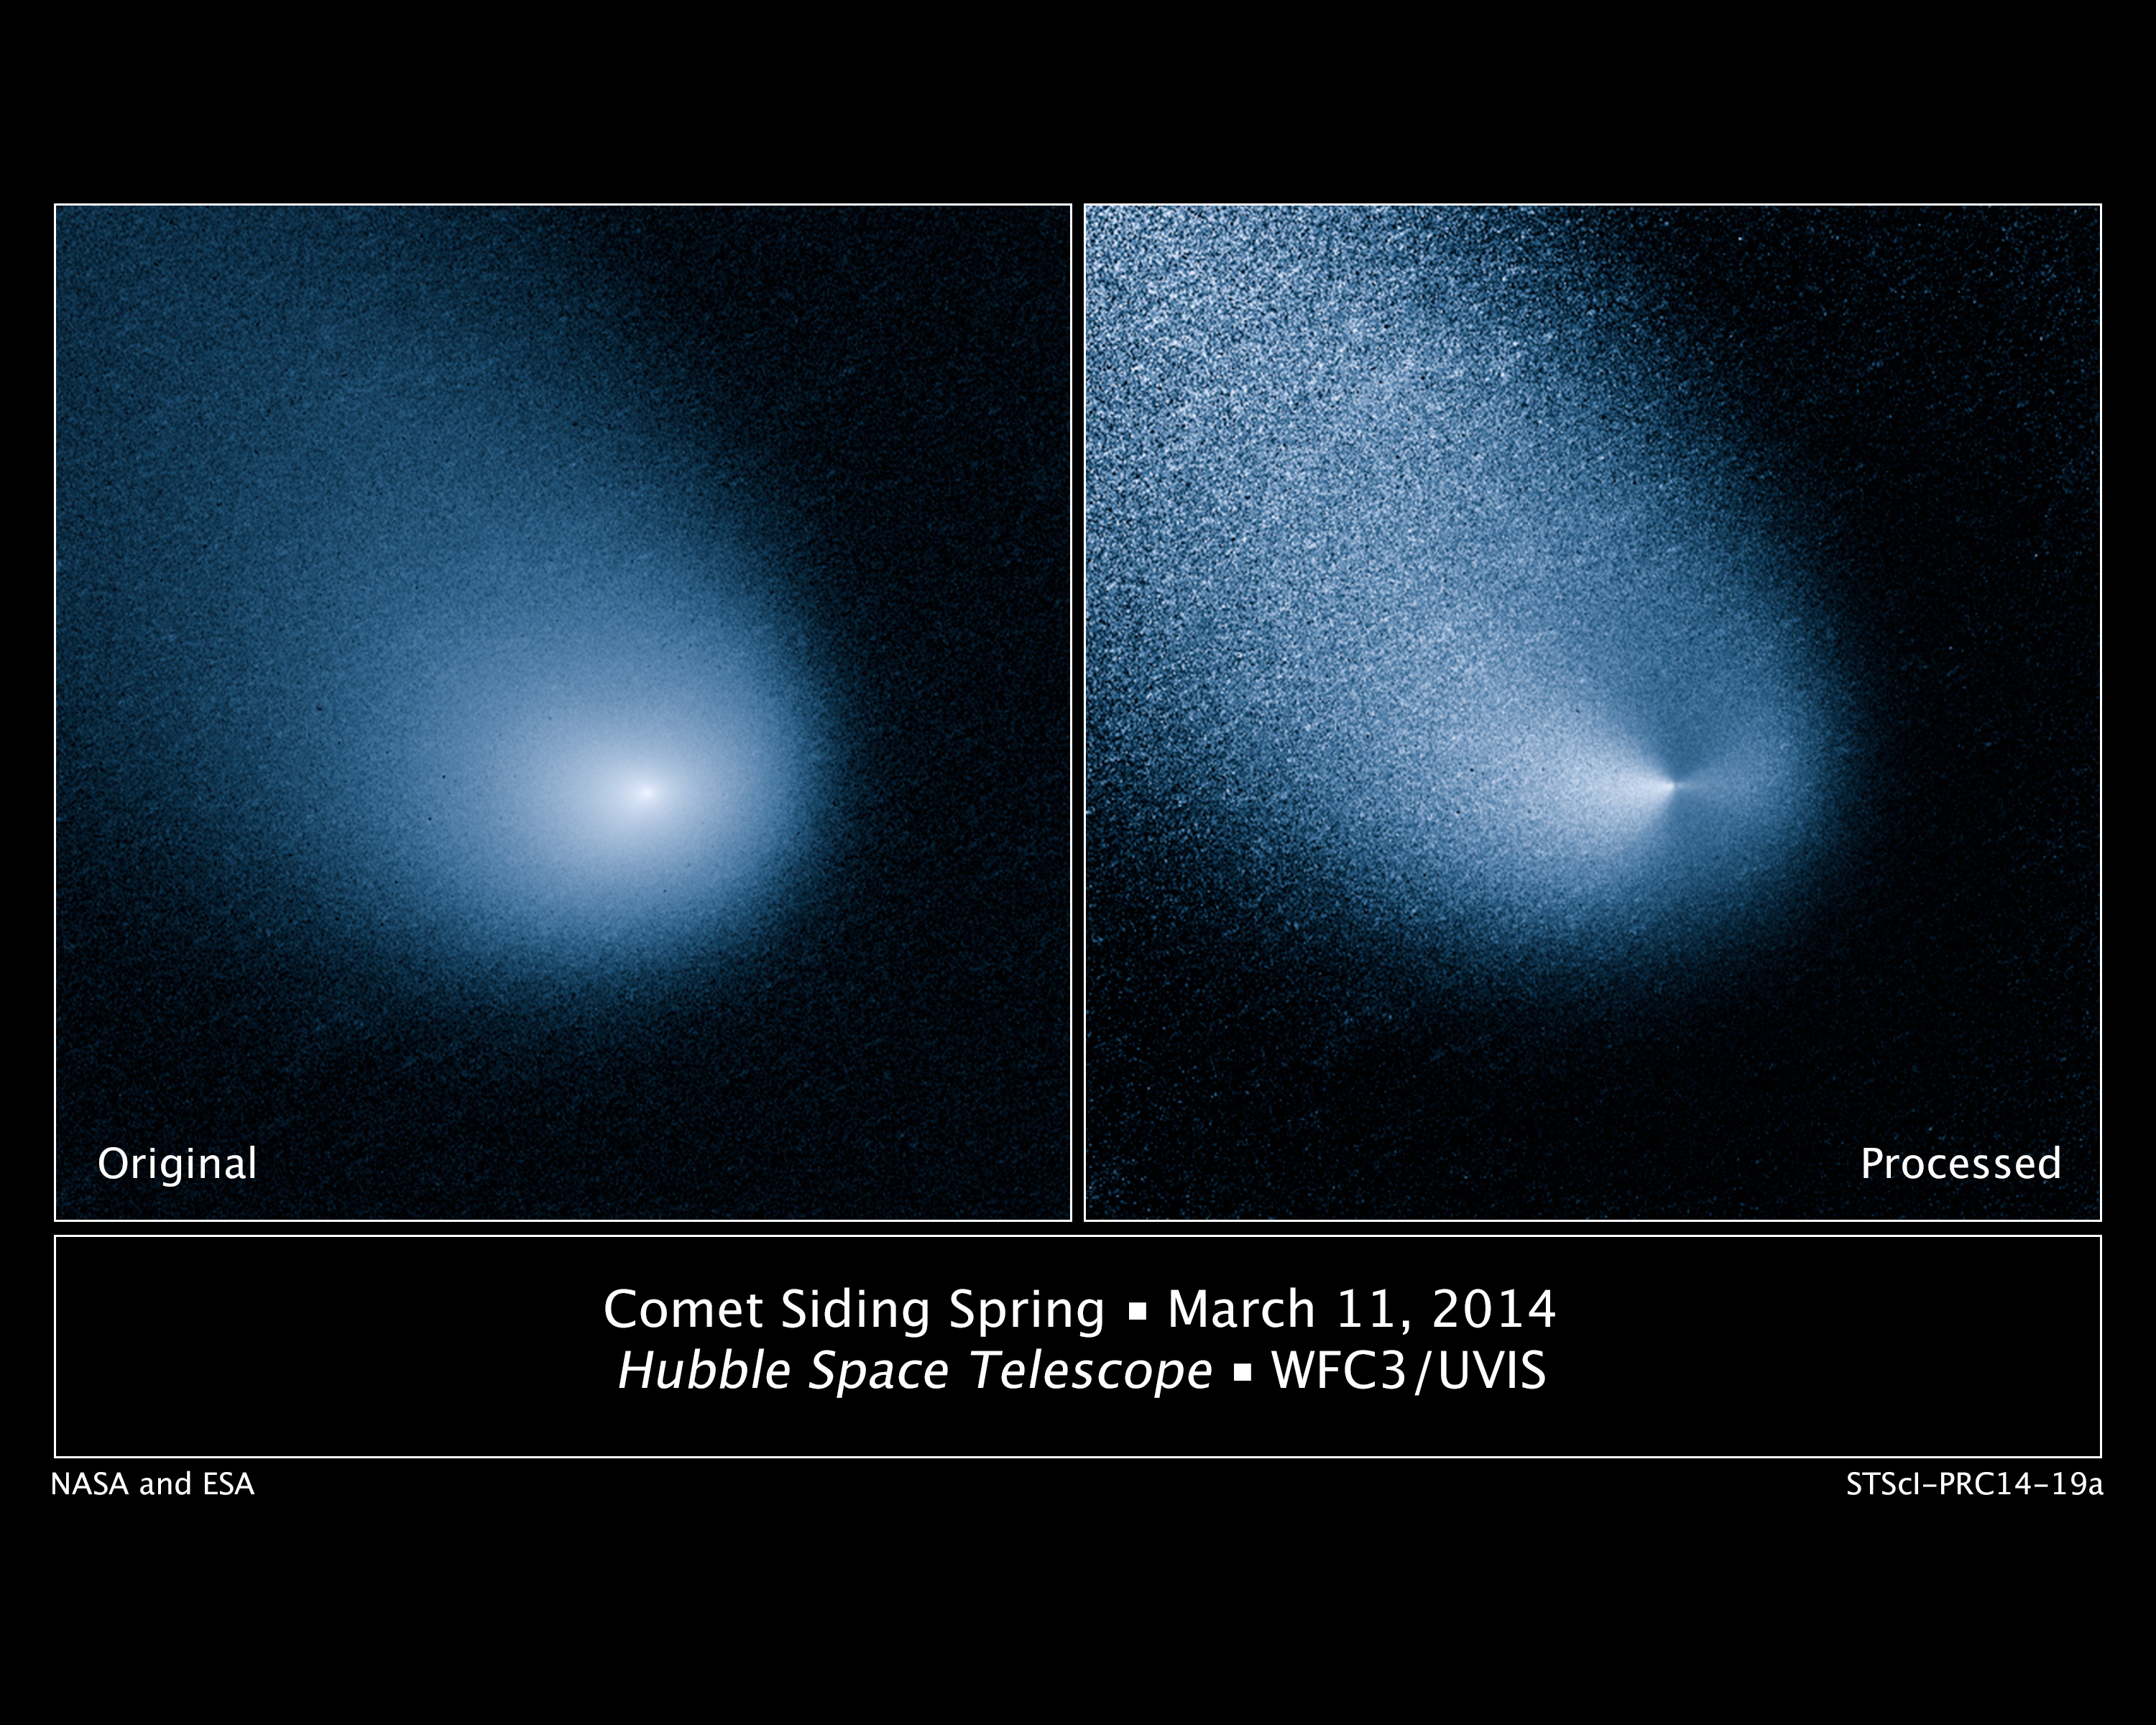 March 27, 2014: Comet Siding Spring is plunging toward the Sun along a roughly 1-million-year orbit. The comet, discovered in 2013, was within the radius of Jupiter's orbit when the Hubble Space Telescope photographed it on March 11, 2014. Hubble resolves two jets of dust coming from the solid icy nucleus. These persistent jets were first seen in Hubble pictures taken on Oct. 29, 2013.